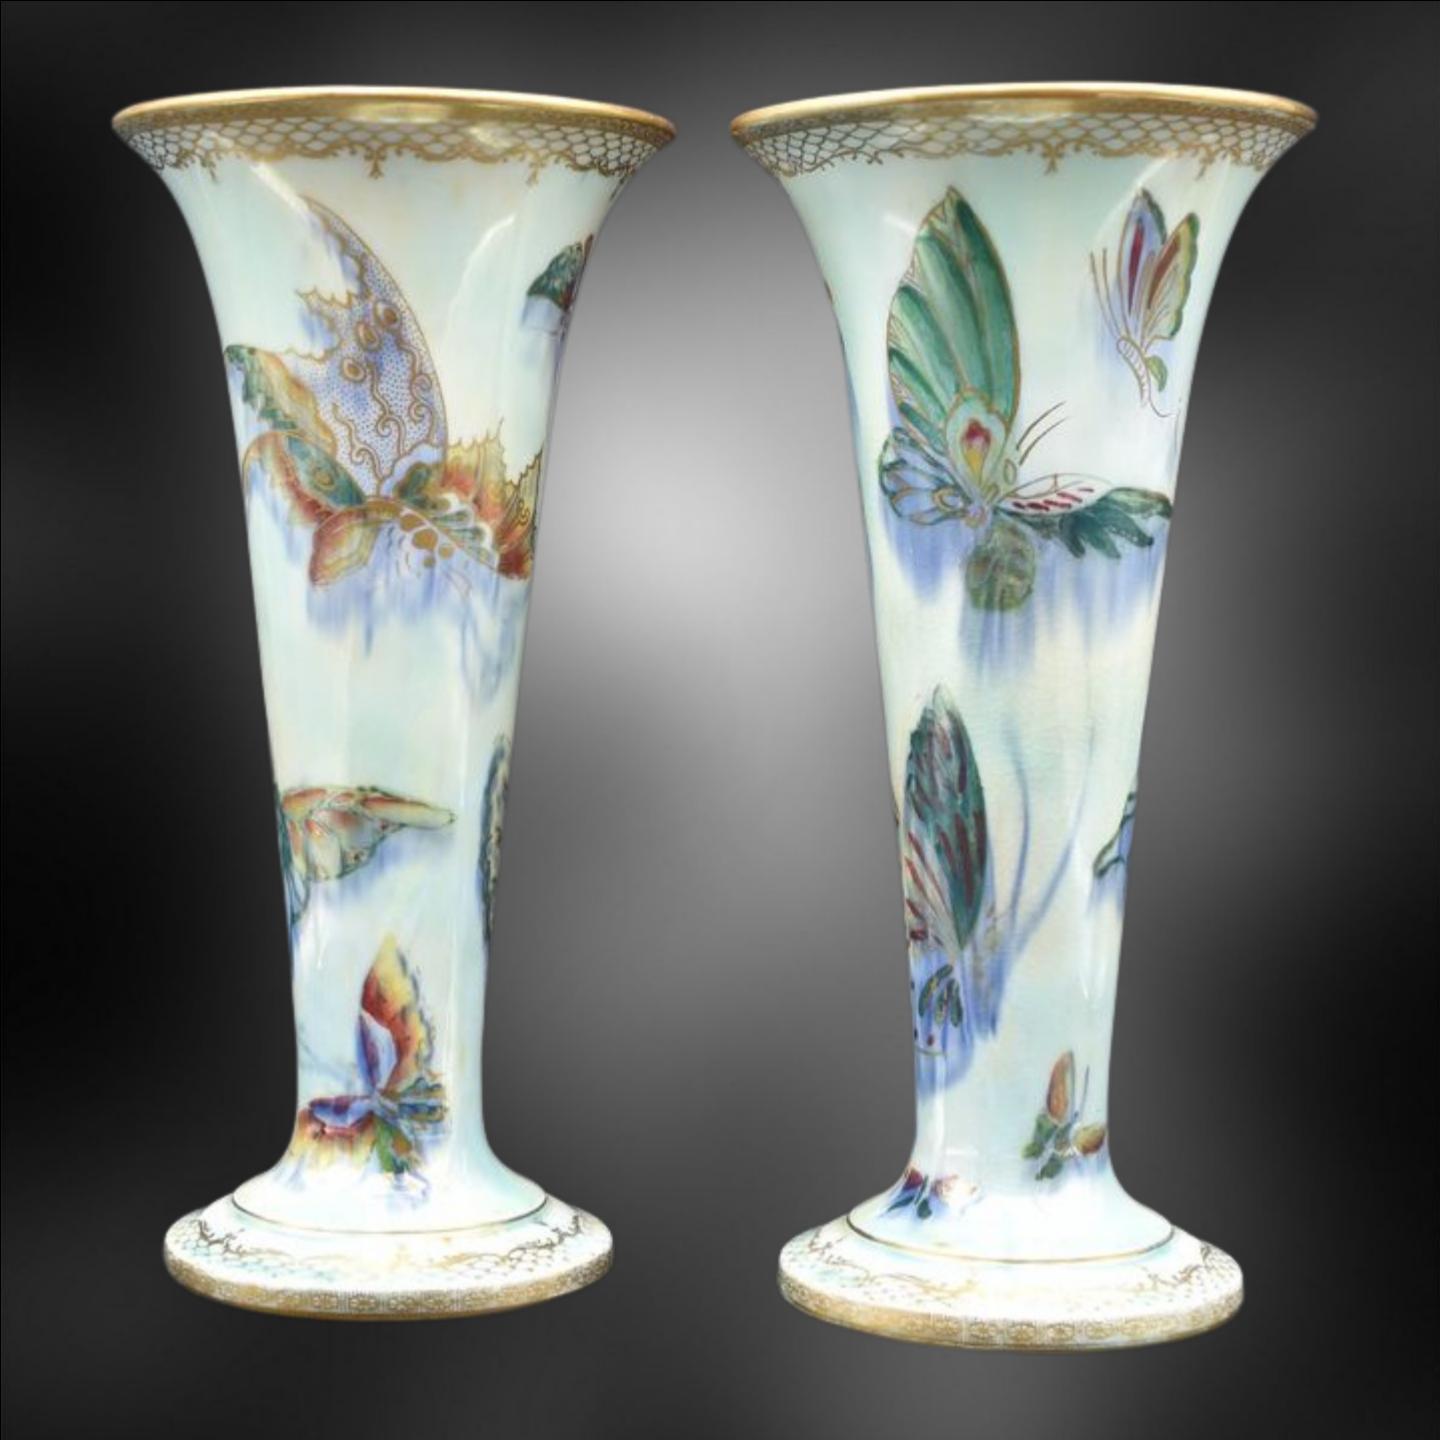 A pair of large trumpet vases, decorated with 'grotesque' butterflies on a mother-of-pearl lustre ground.

Probably the best of Wedgwood's female designers, Daisy was an eccentric character, who pushed her way into a world dominated by men, and